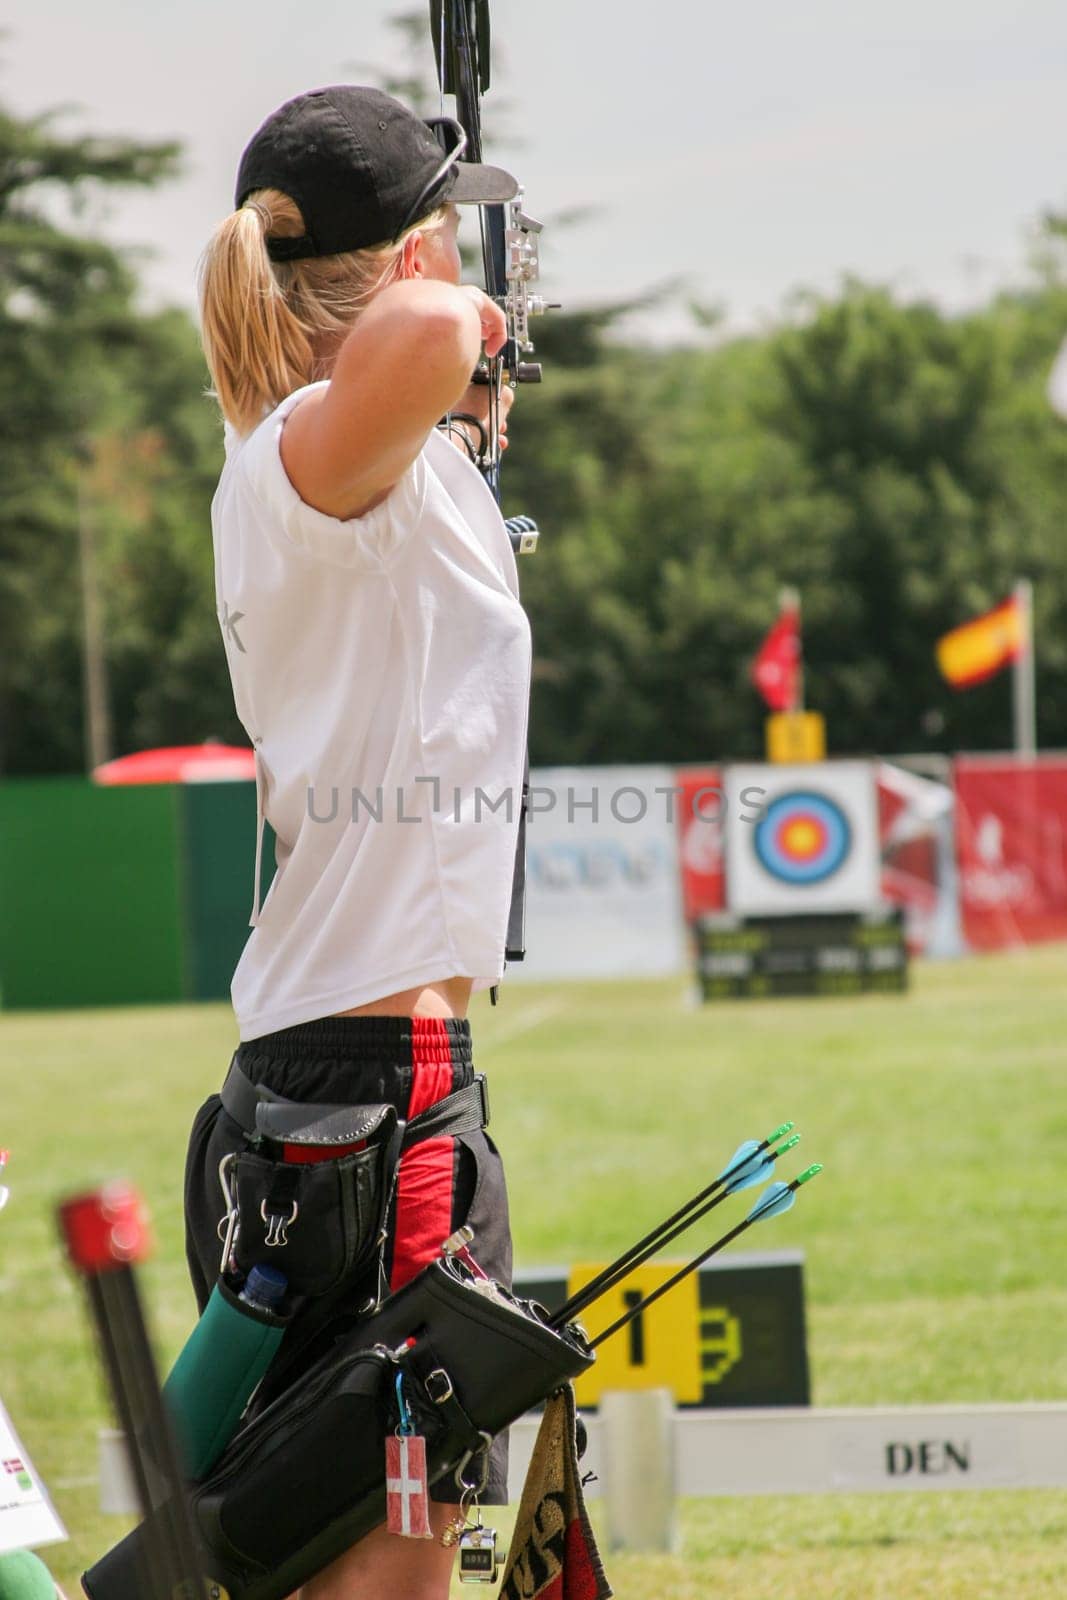 Female archer in the shooting position, facing a line of targets in competition.